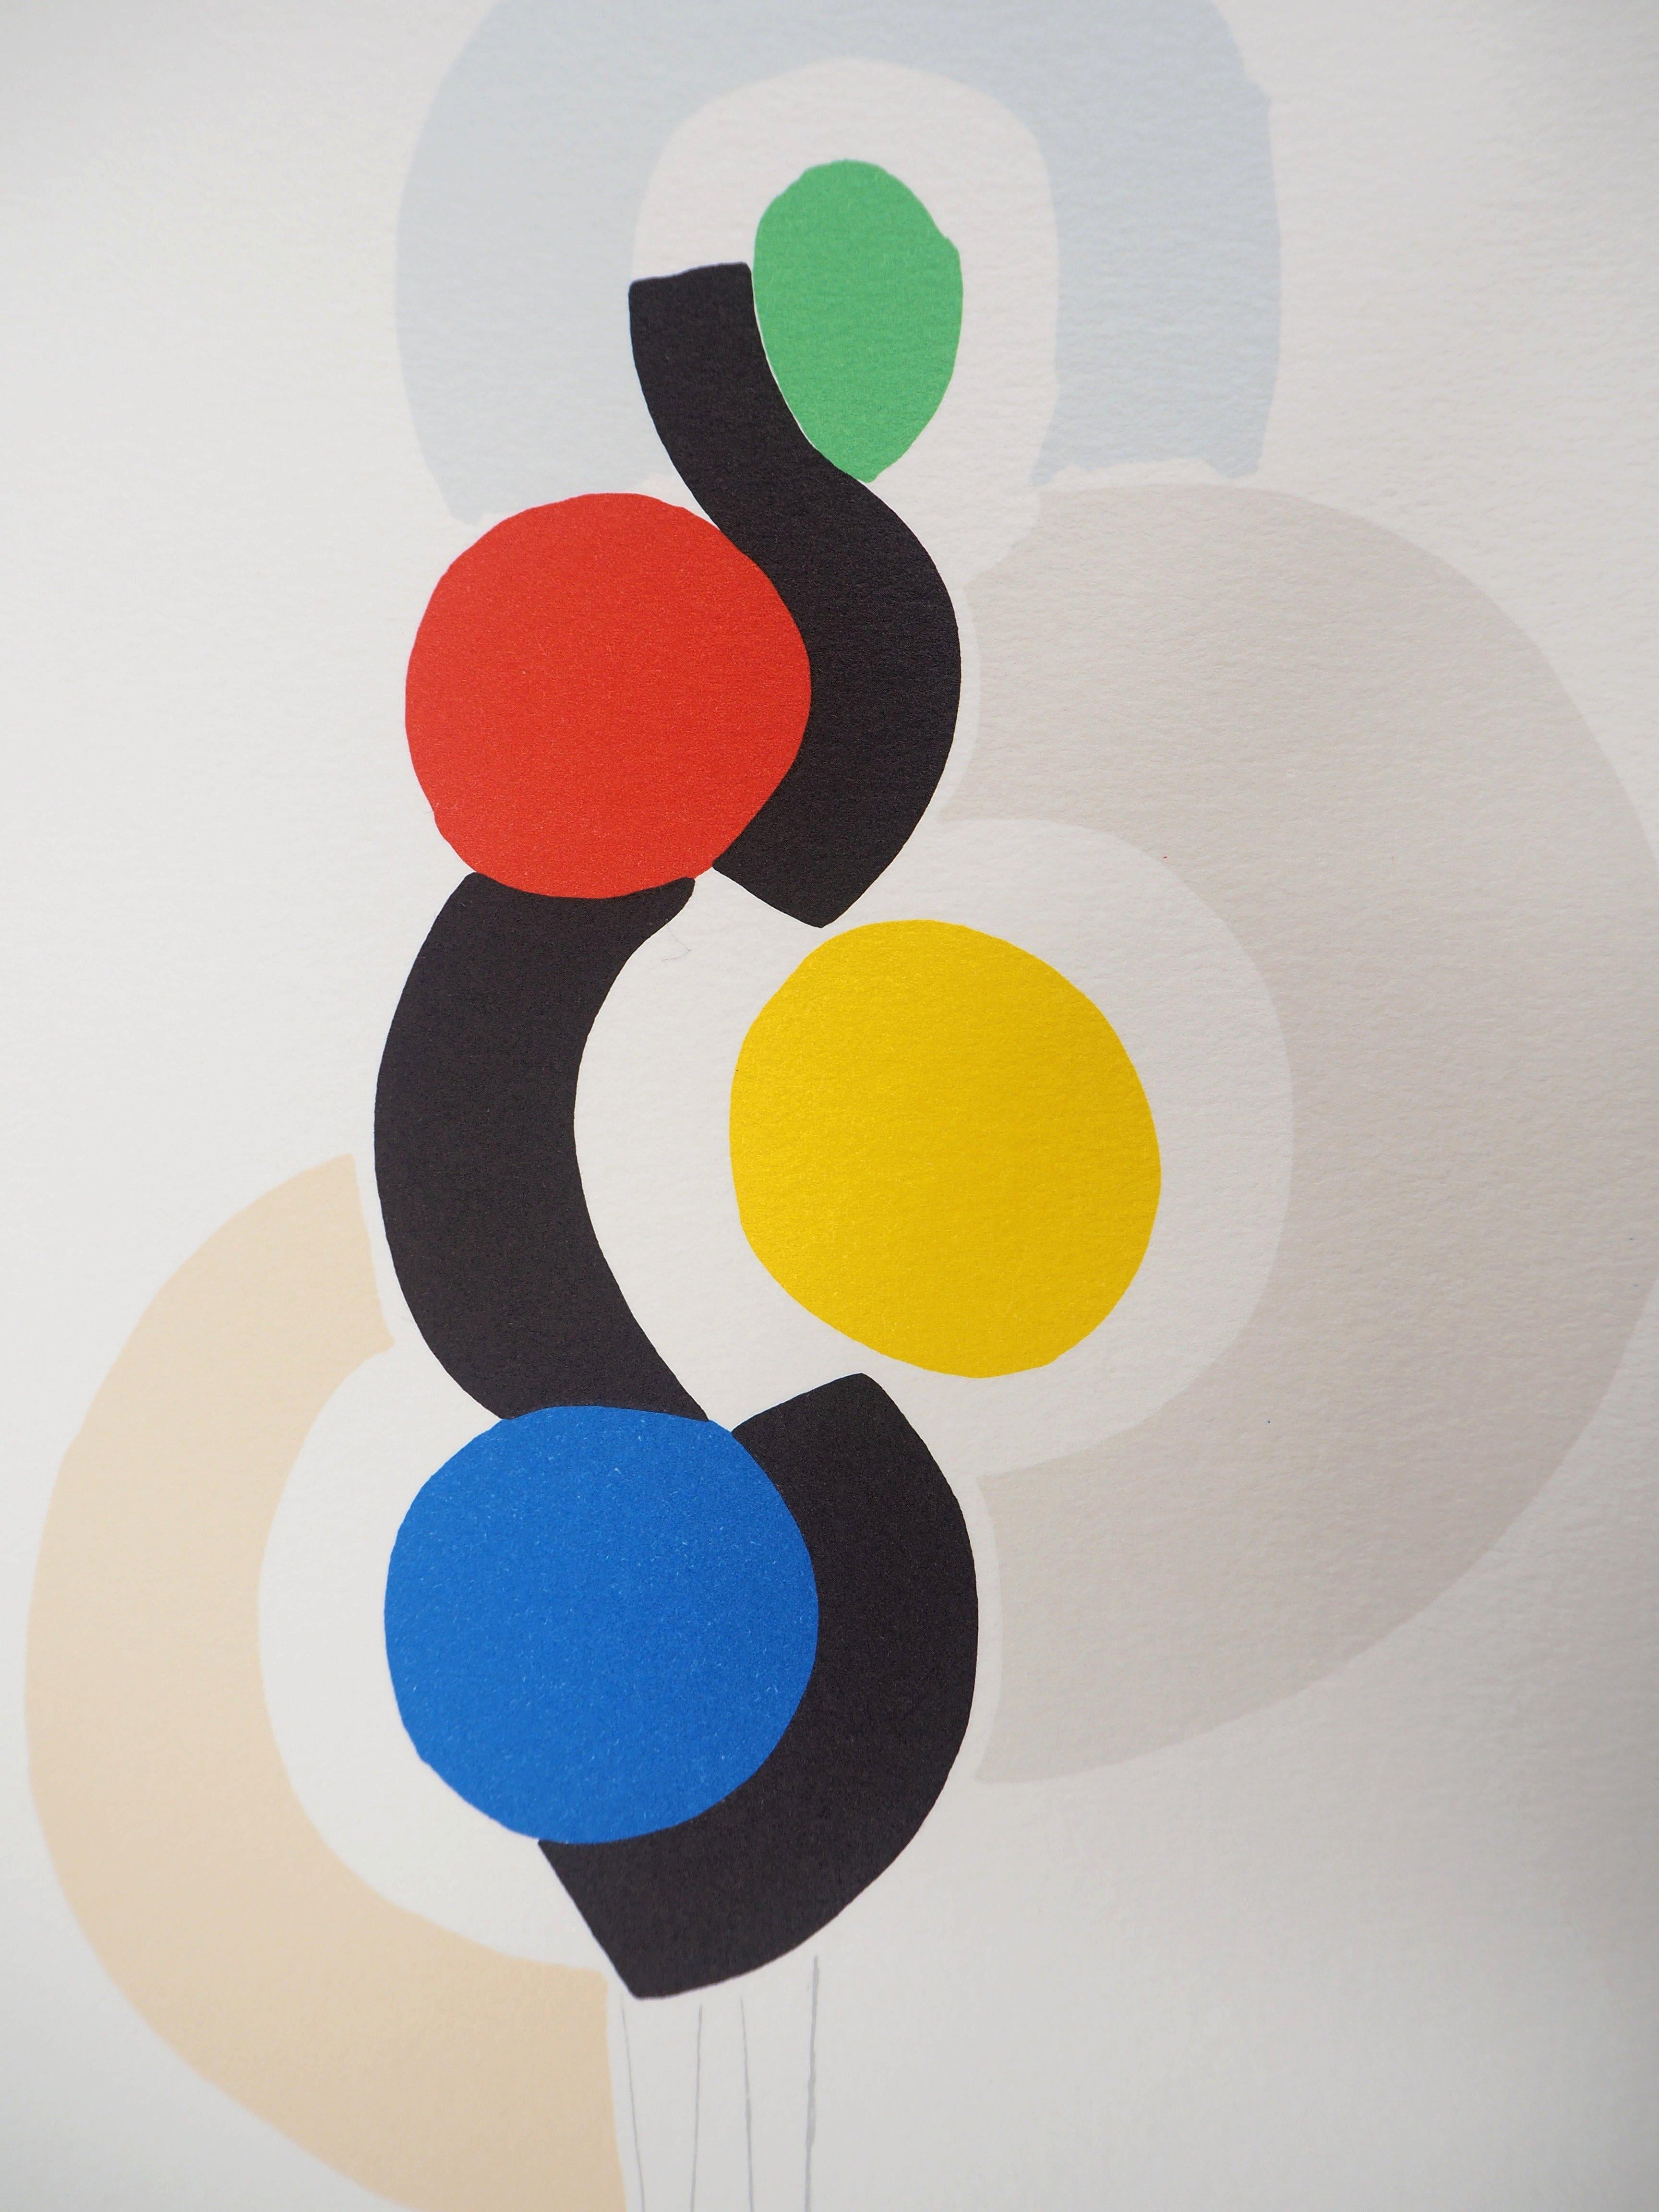 Rythm and Dance - Lithograph (Artcurial edition) - Modern Print by Sonia Delaunay